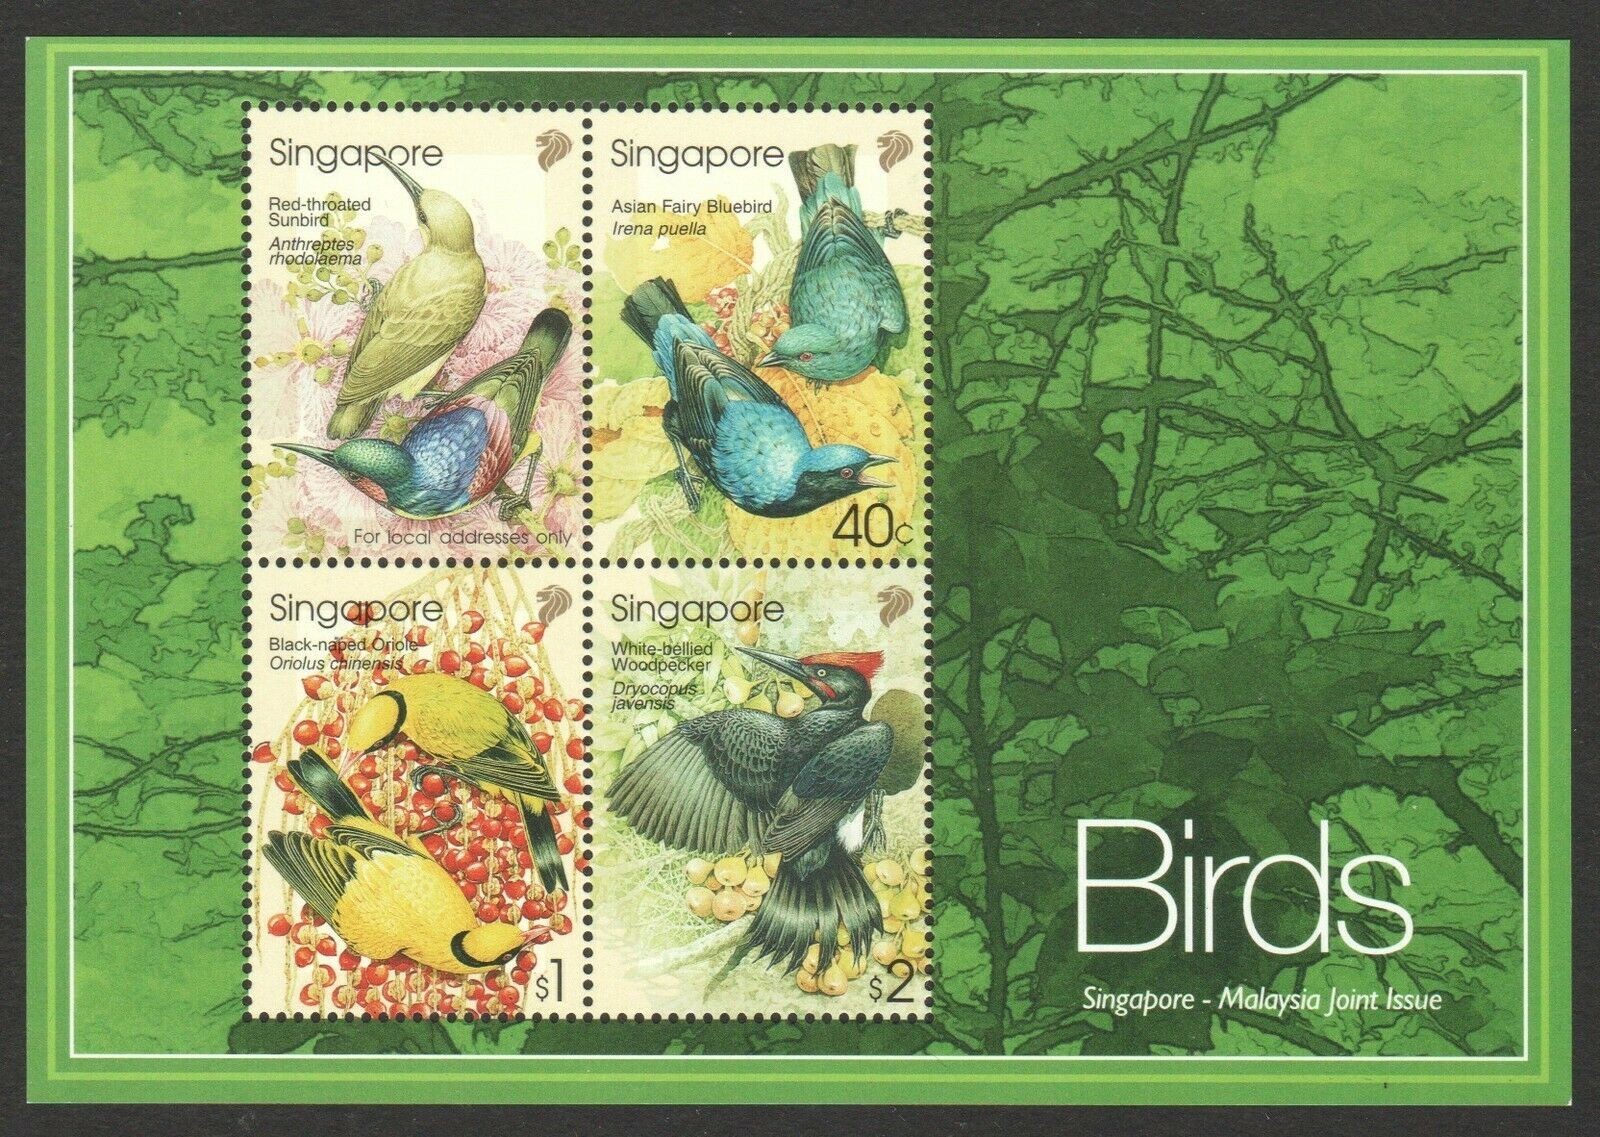 Singapore 2002 Malaysia Joint Issue Birds Souvenir Sheet 4 Stamps Sc#1017a Mint